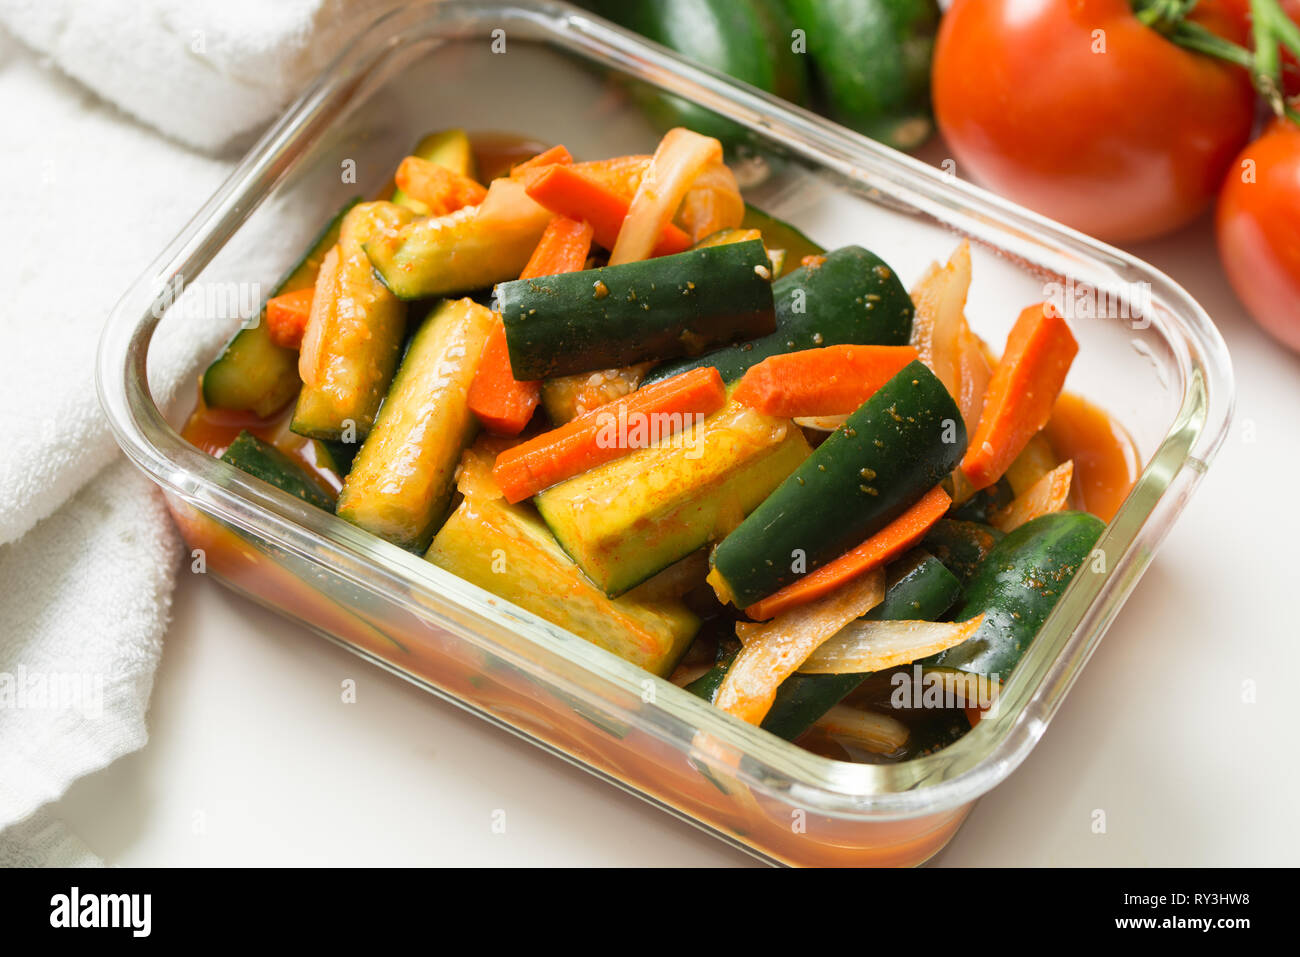 Korea style kimchi pickled cucumbers with carrots salad Stock Photo